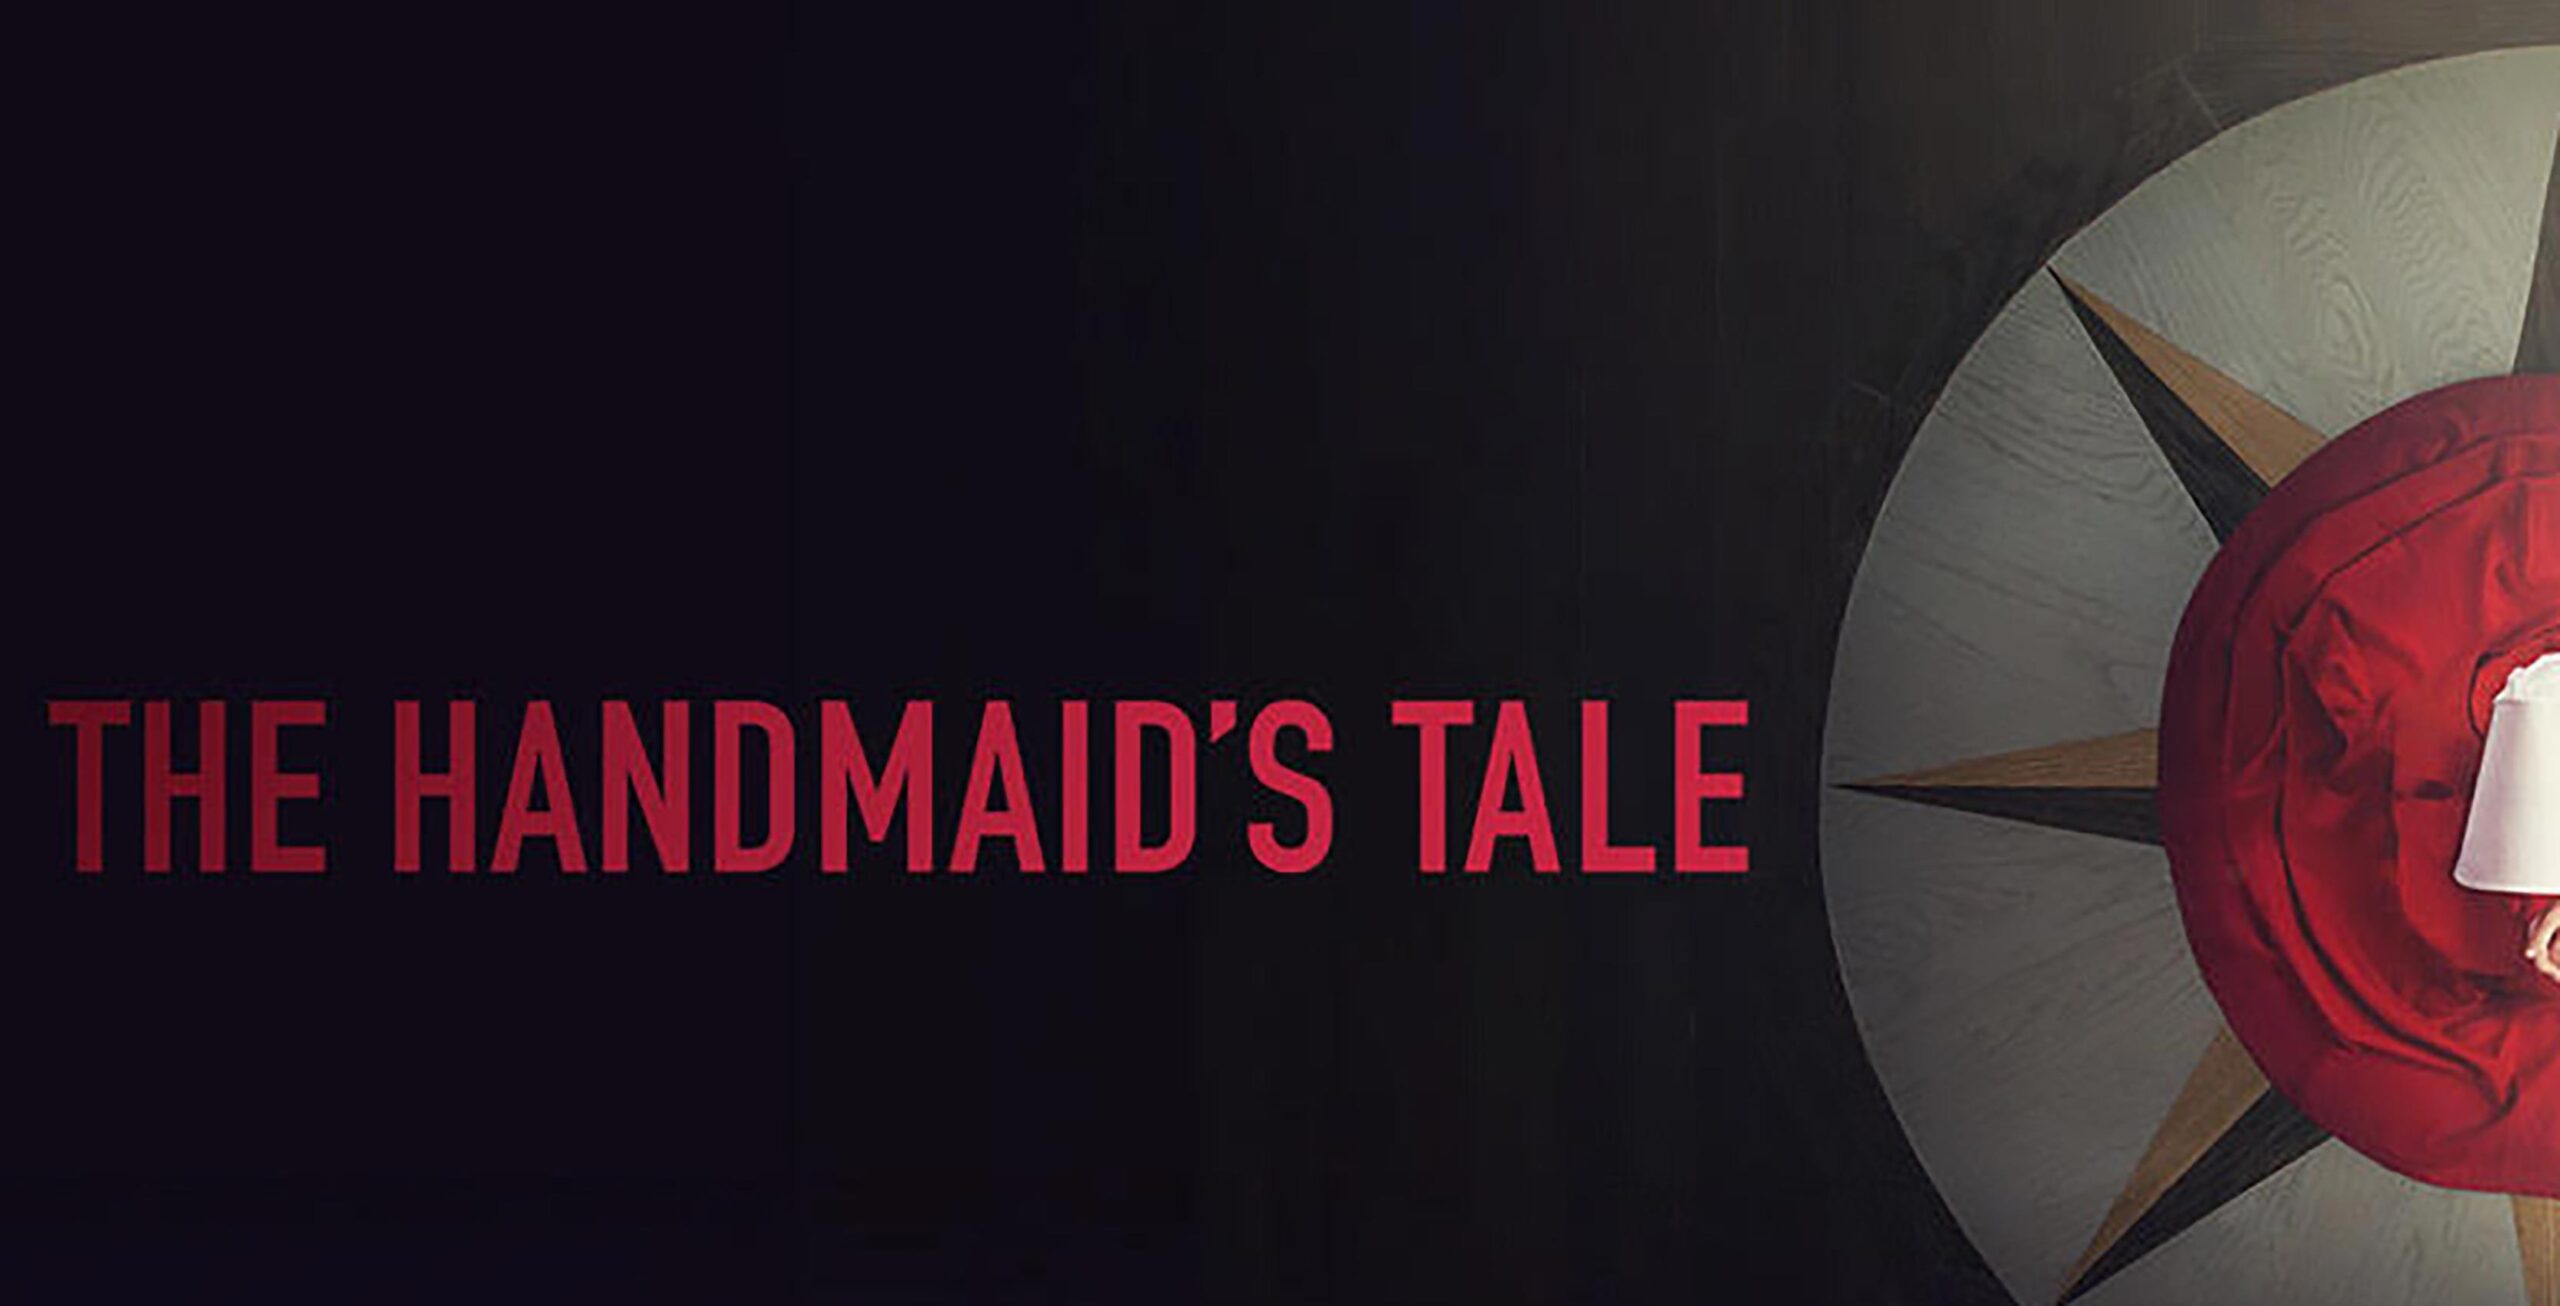 The Handmaid’s Tale Season releasing May on iTunes in Canada